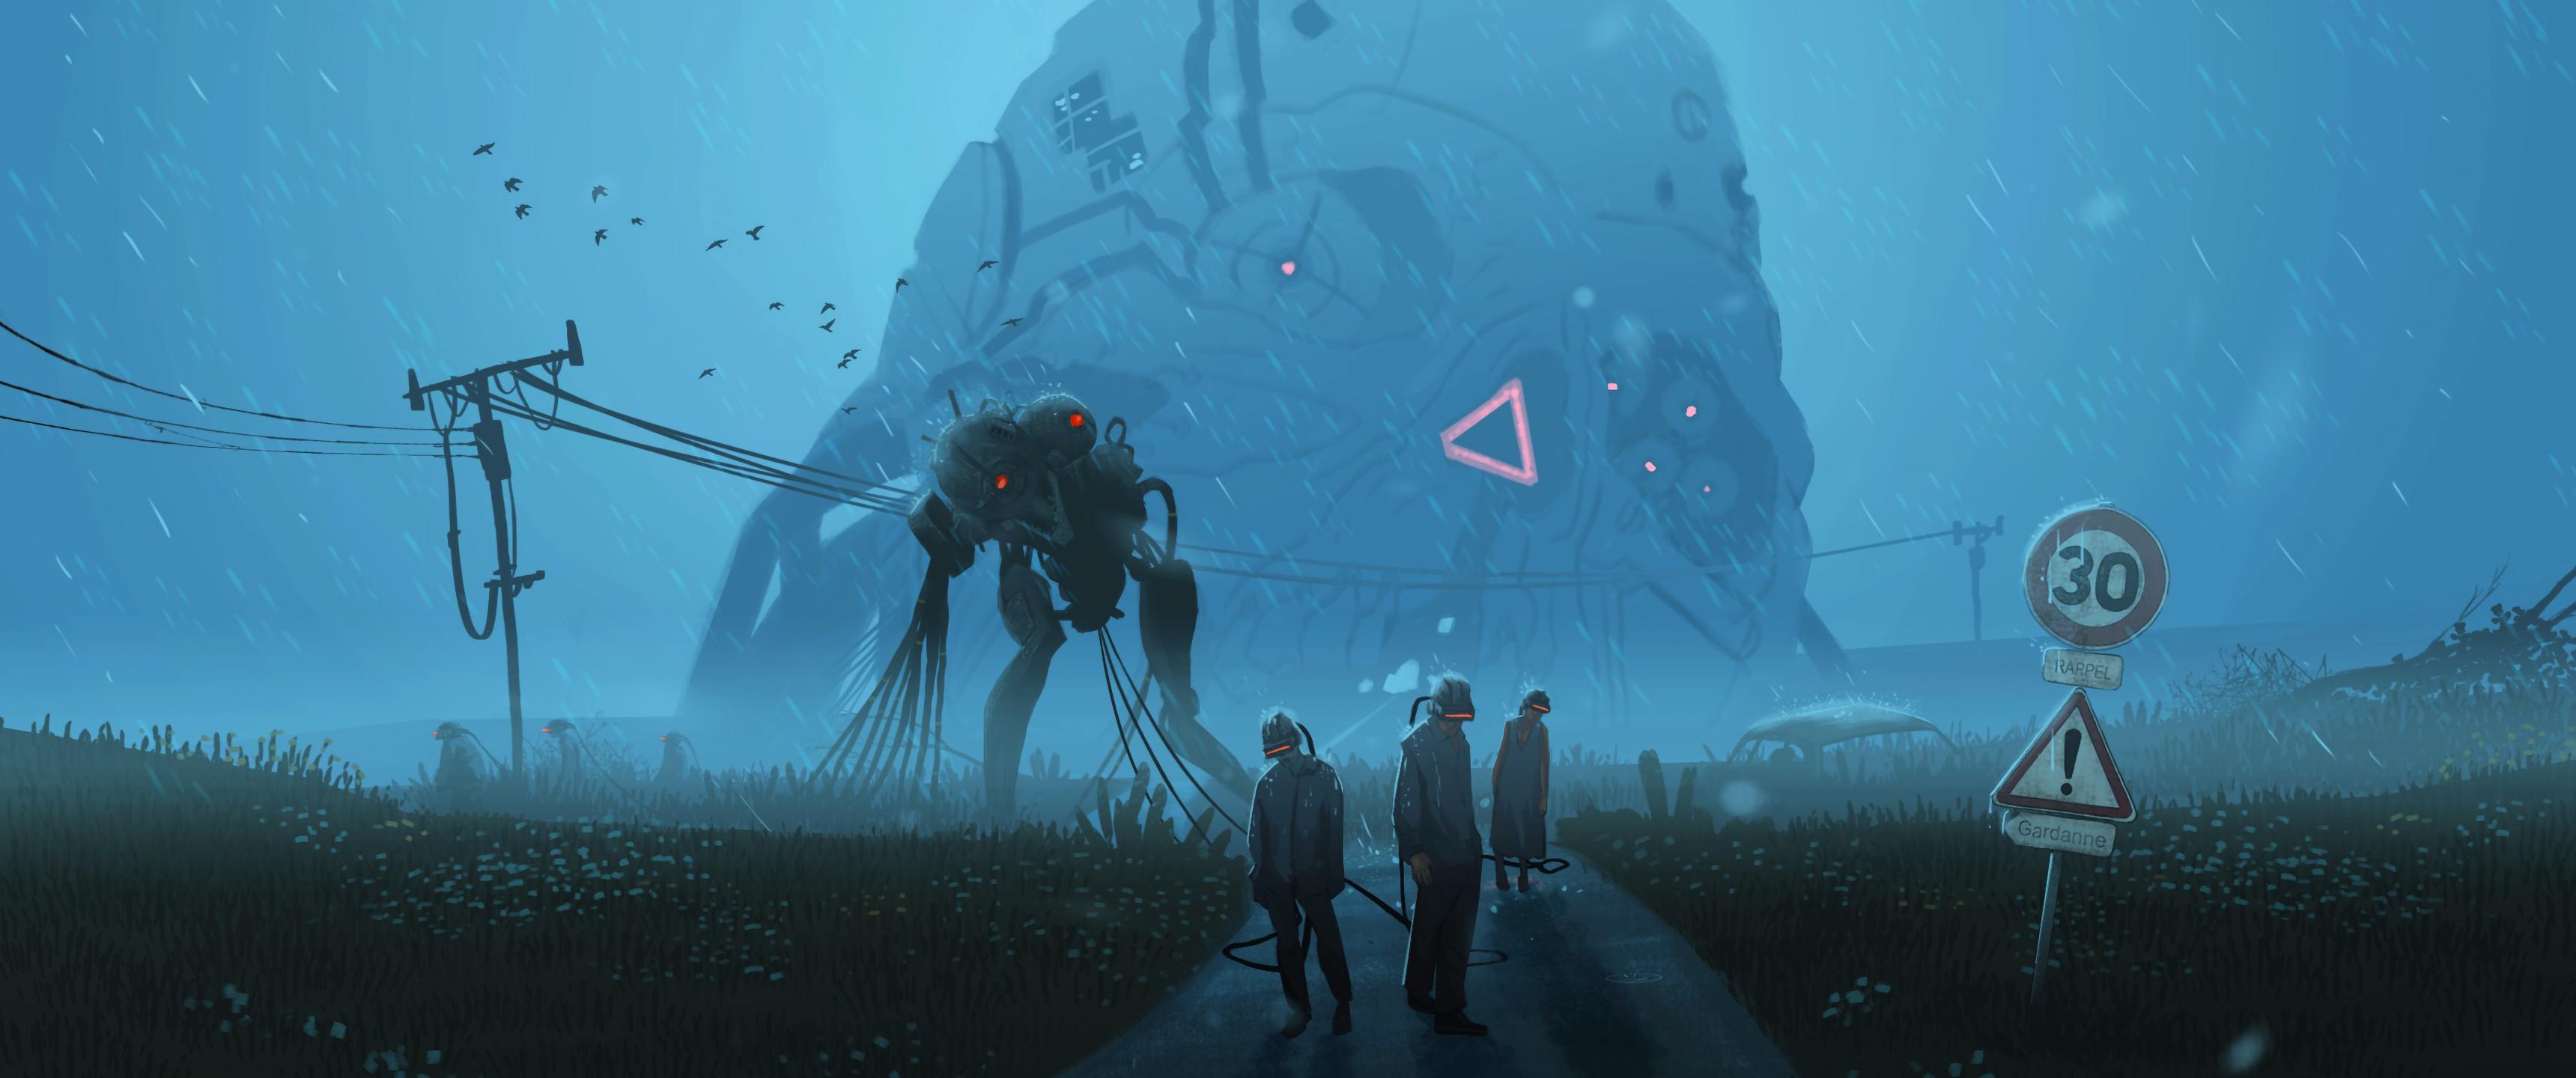 A giant robot with glowing red eyes stands on a country road, surrounded by three humans. - 3440x1440